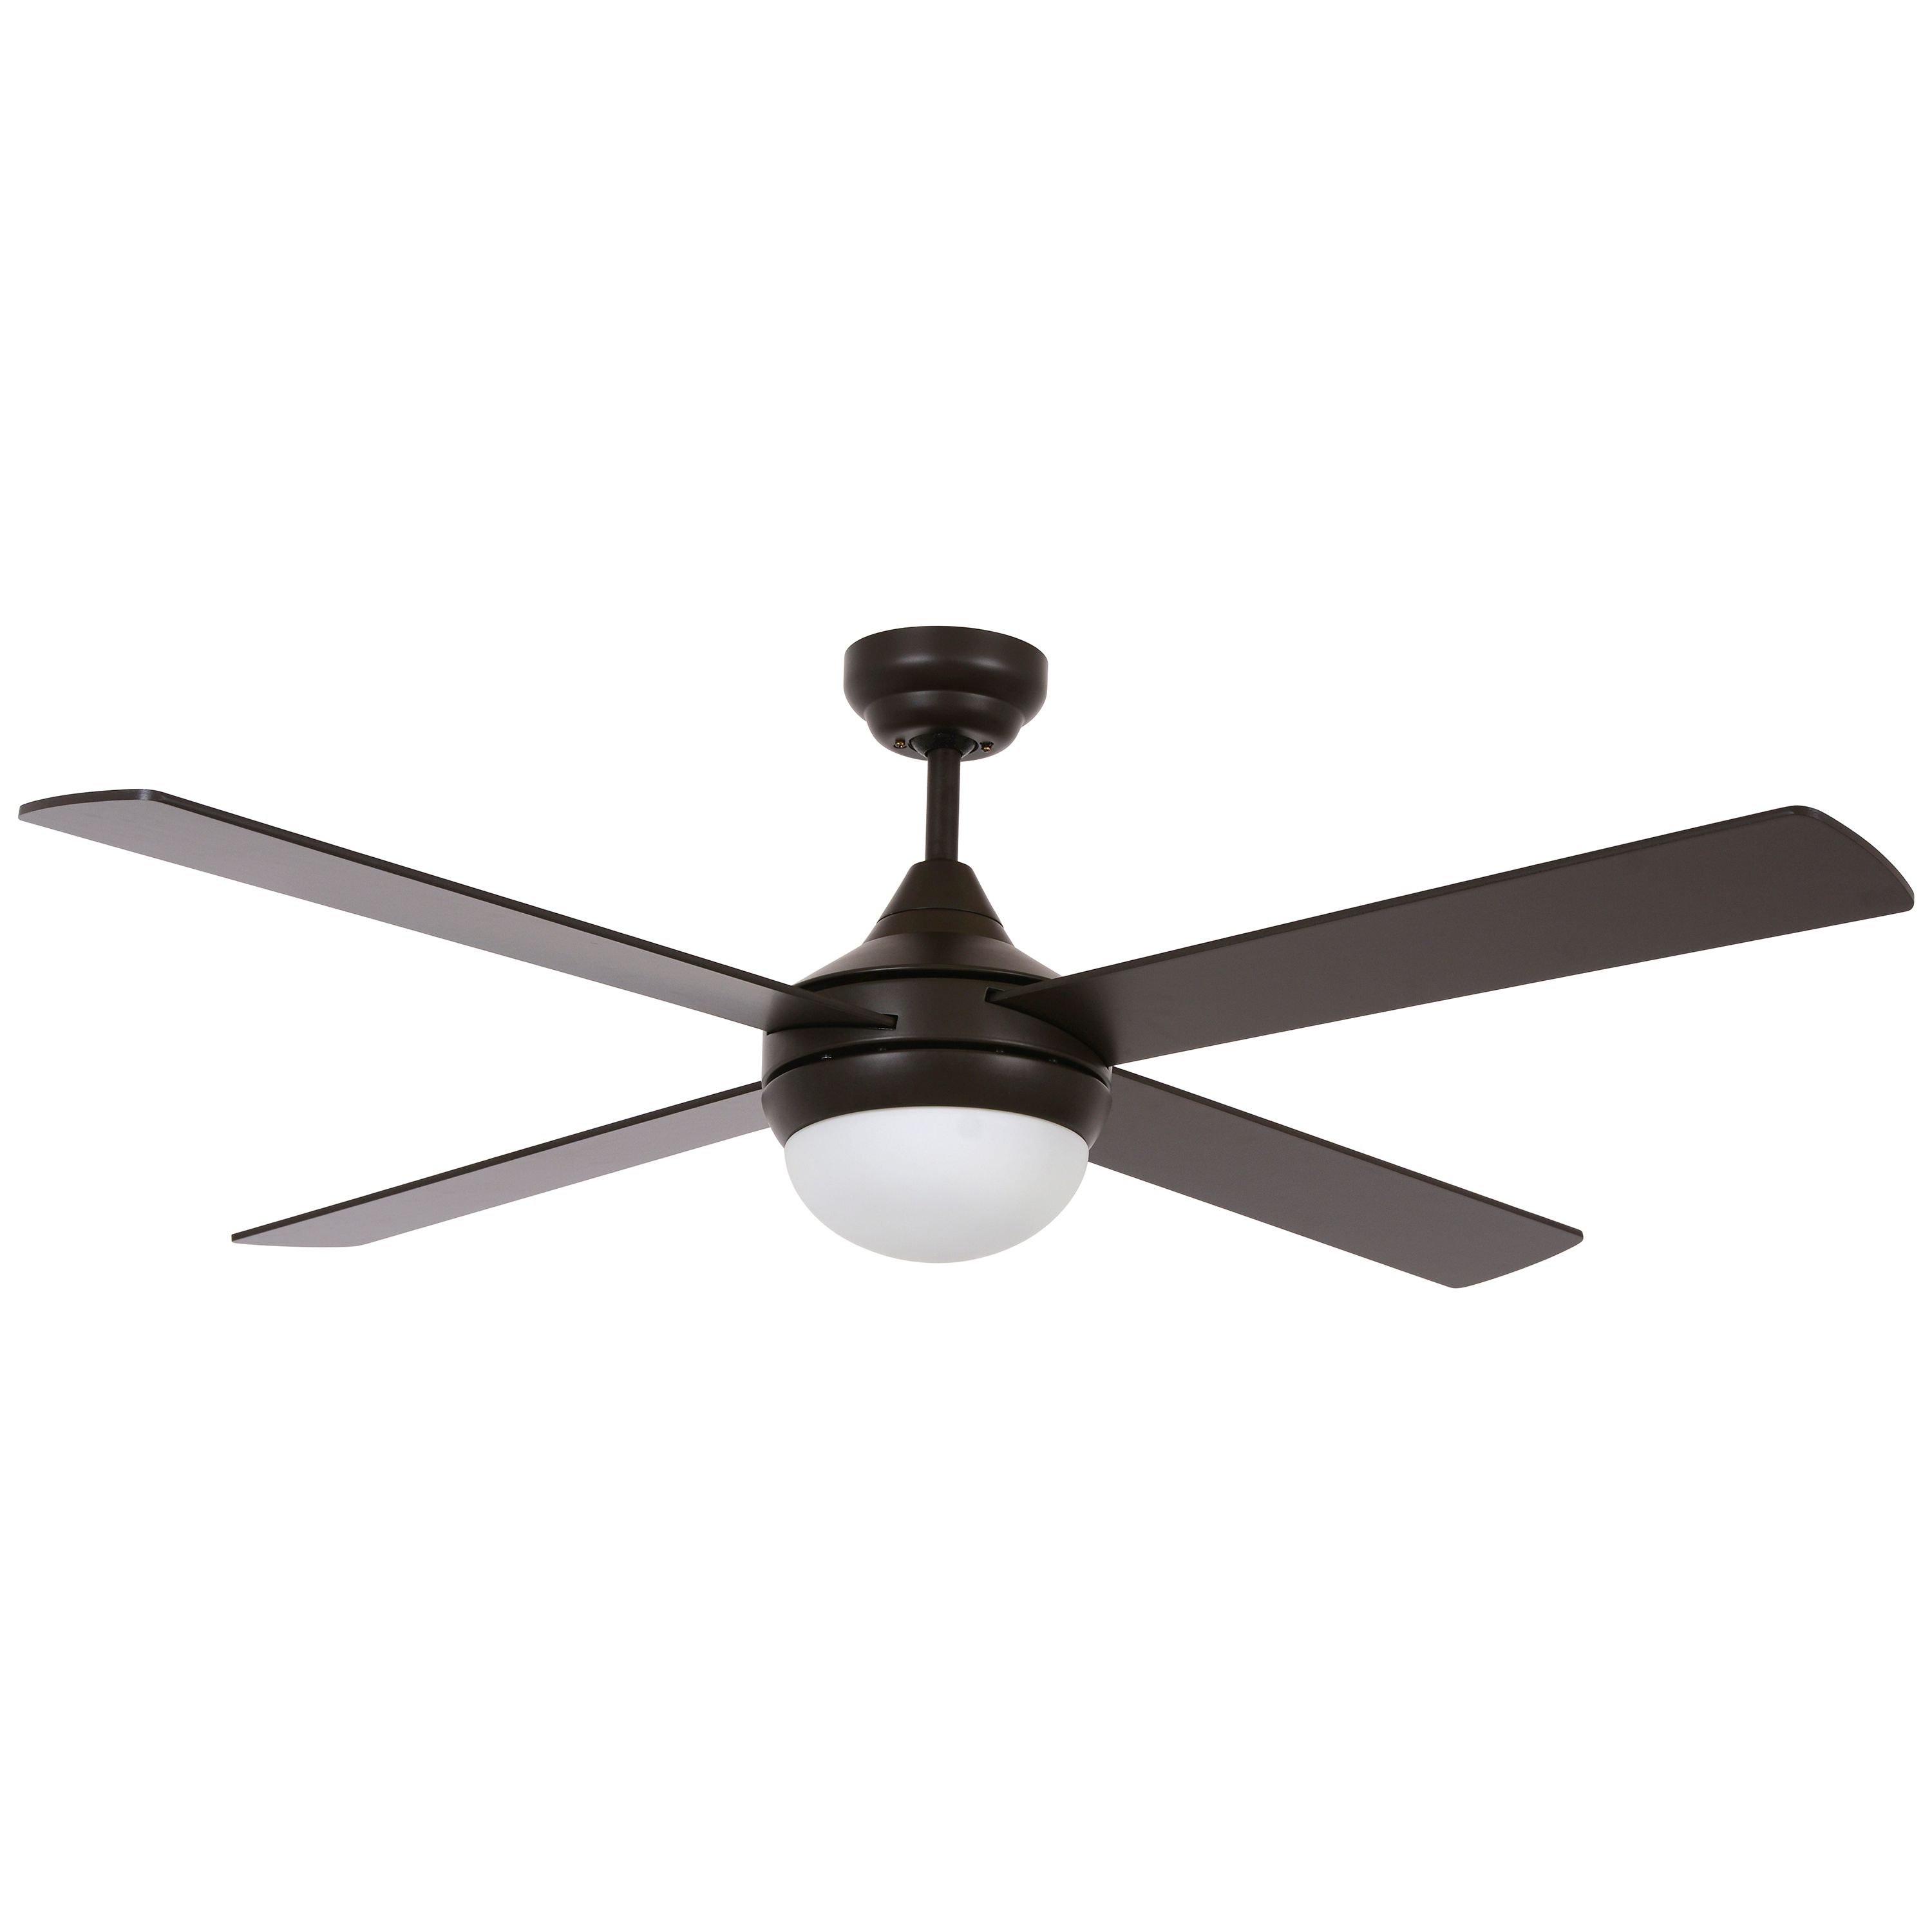 Lucci Air Airlie Ii Eco Ceiling Fan By, Outdoor Ceiling Fans Bunnings